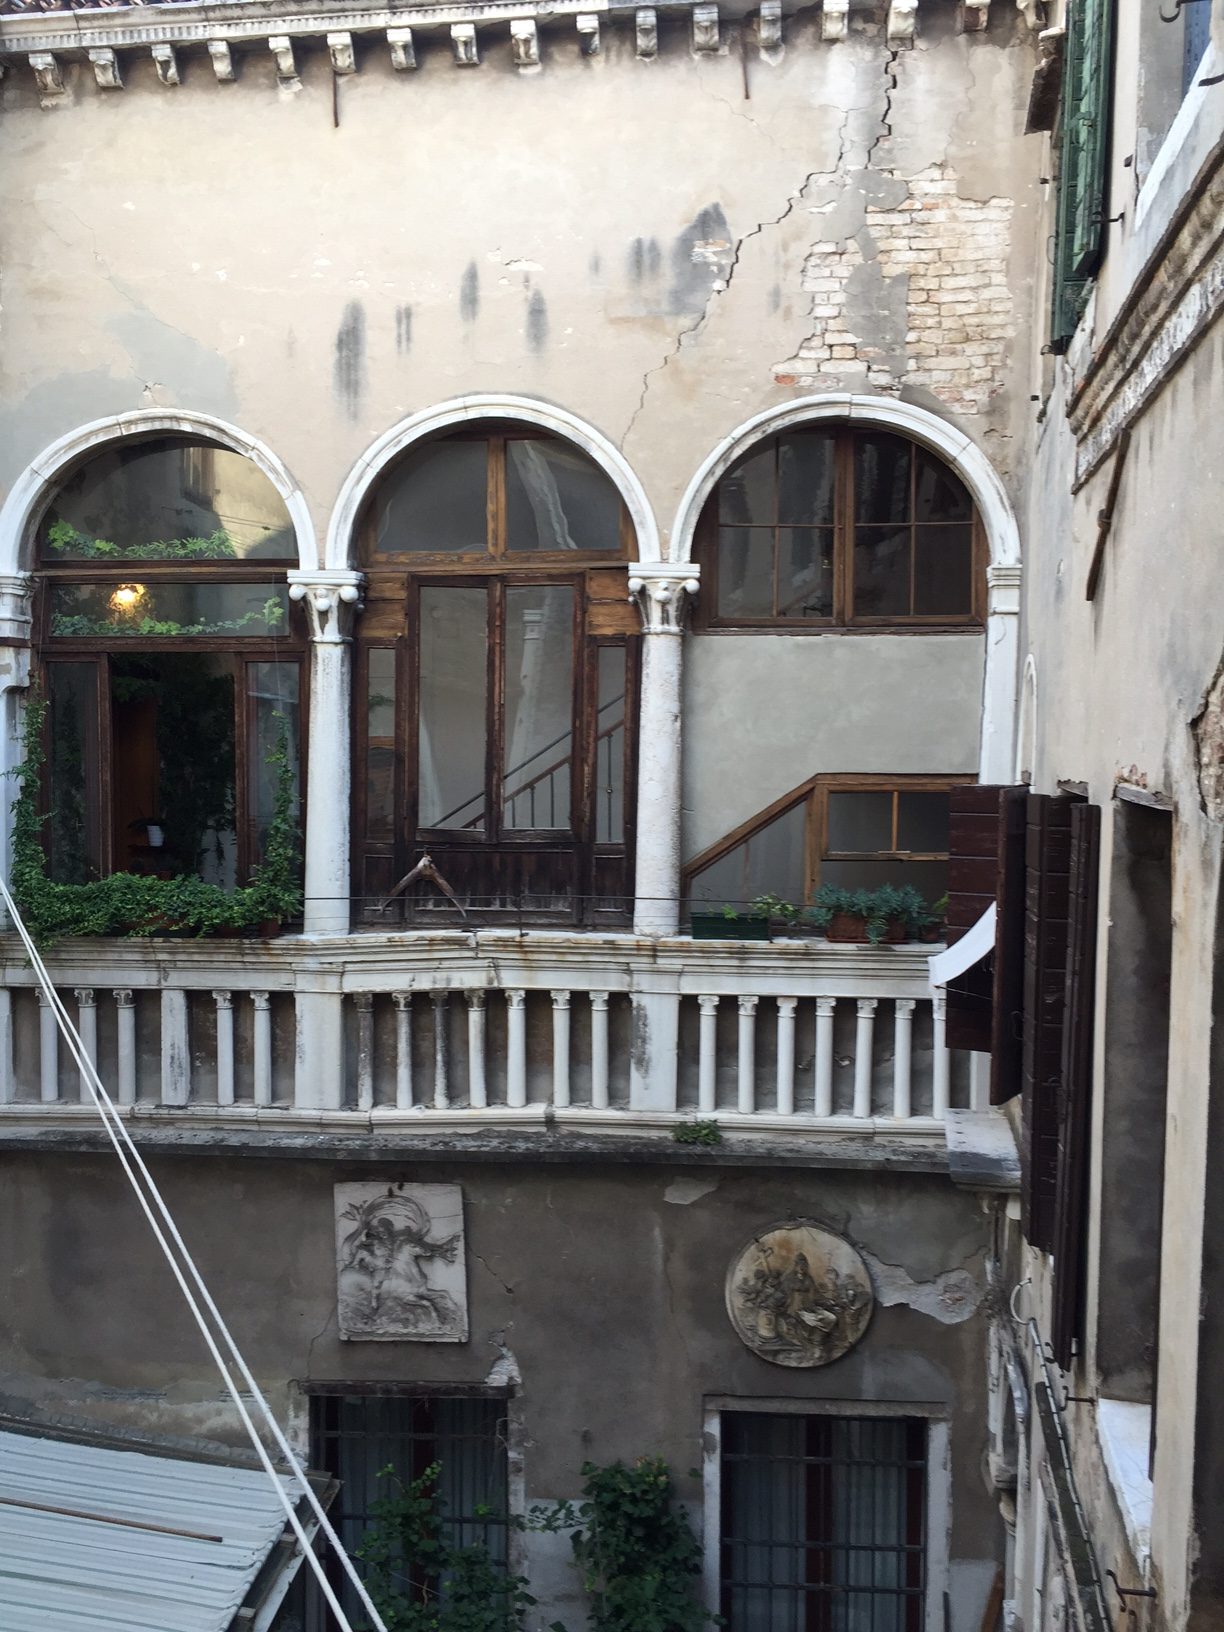 Venice: The view from the bedroom window. Fantastic.